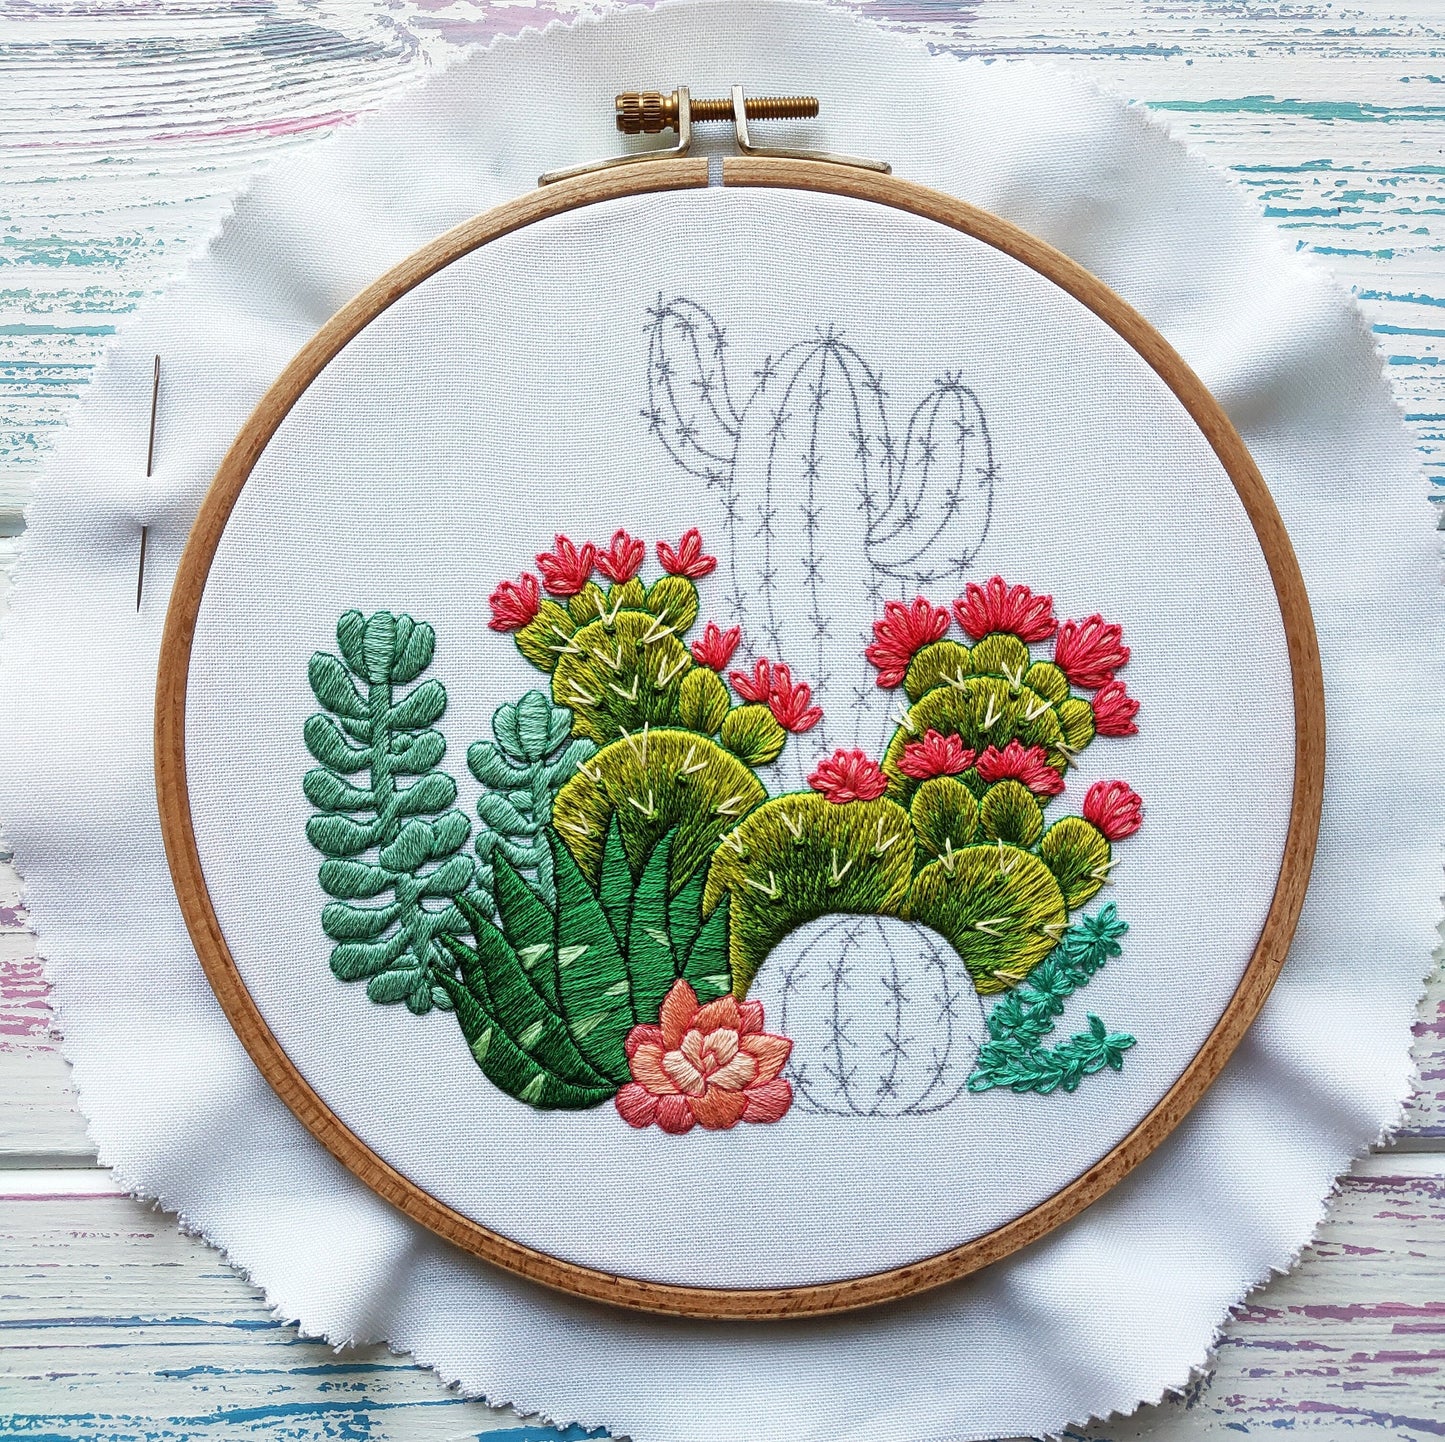 Cactuses and Succulents - Hand Embroidery Pattern | Digital Download